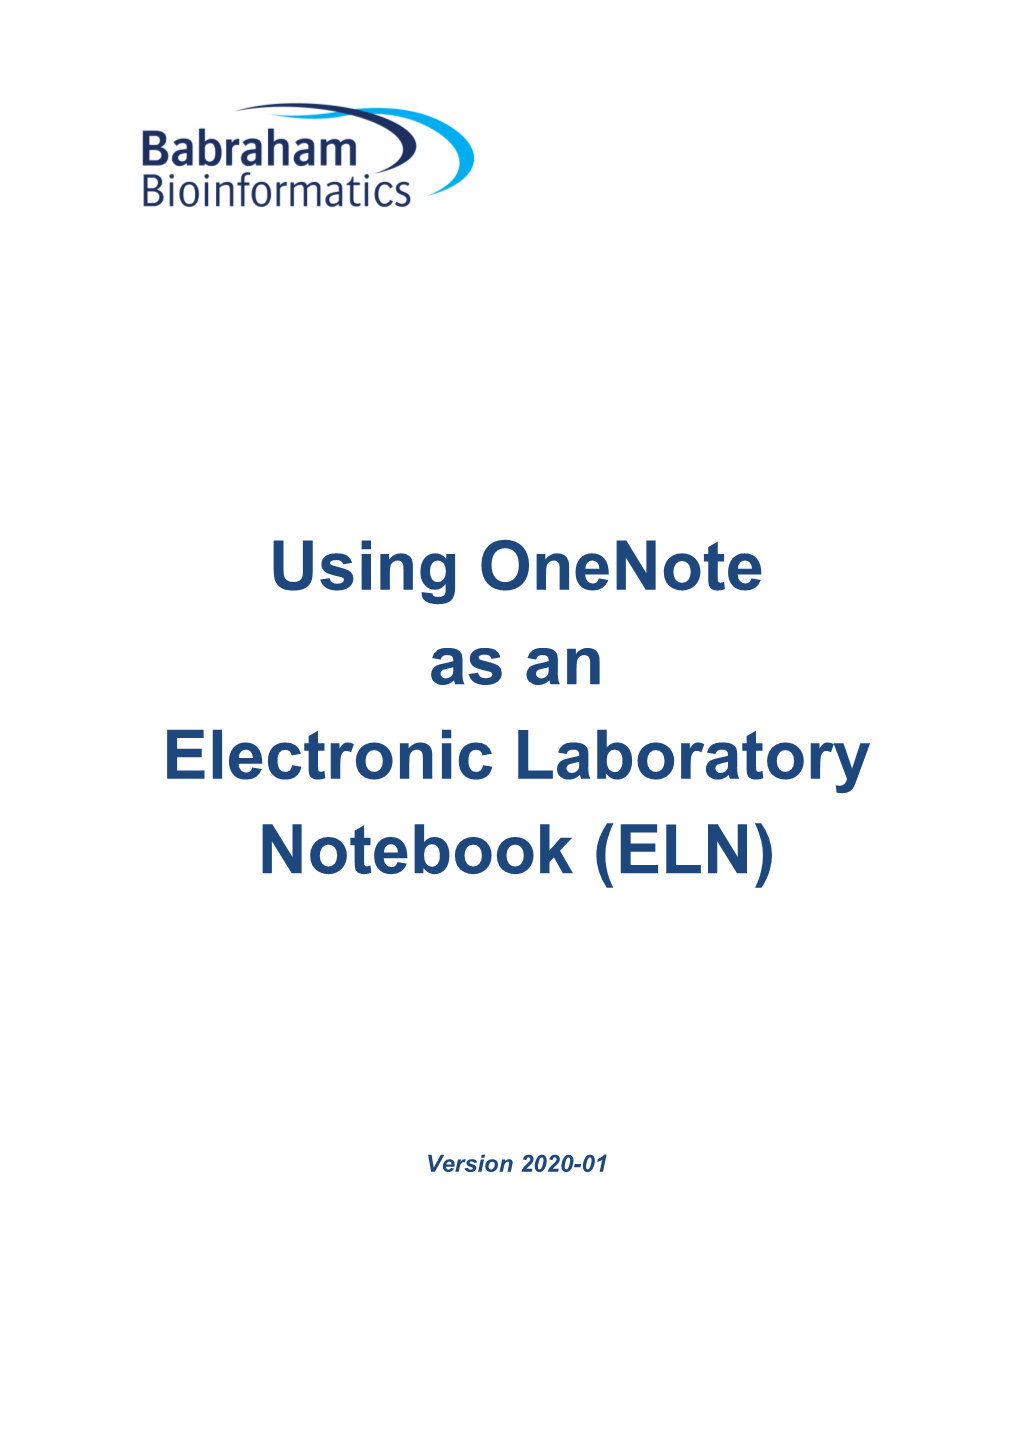 Using Onenote As an Electronic Laboratory Notebook (ELN)